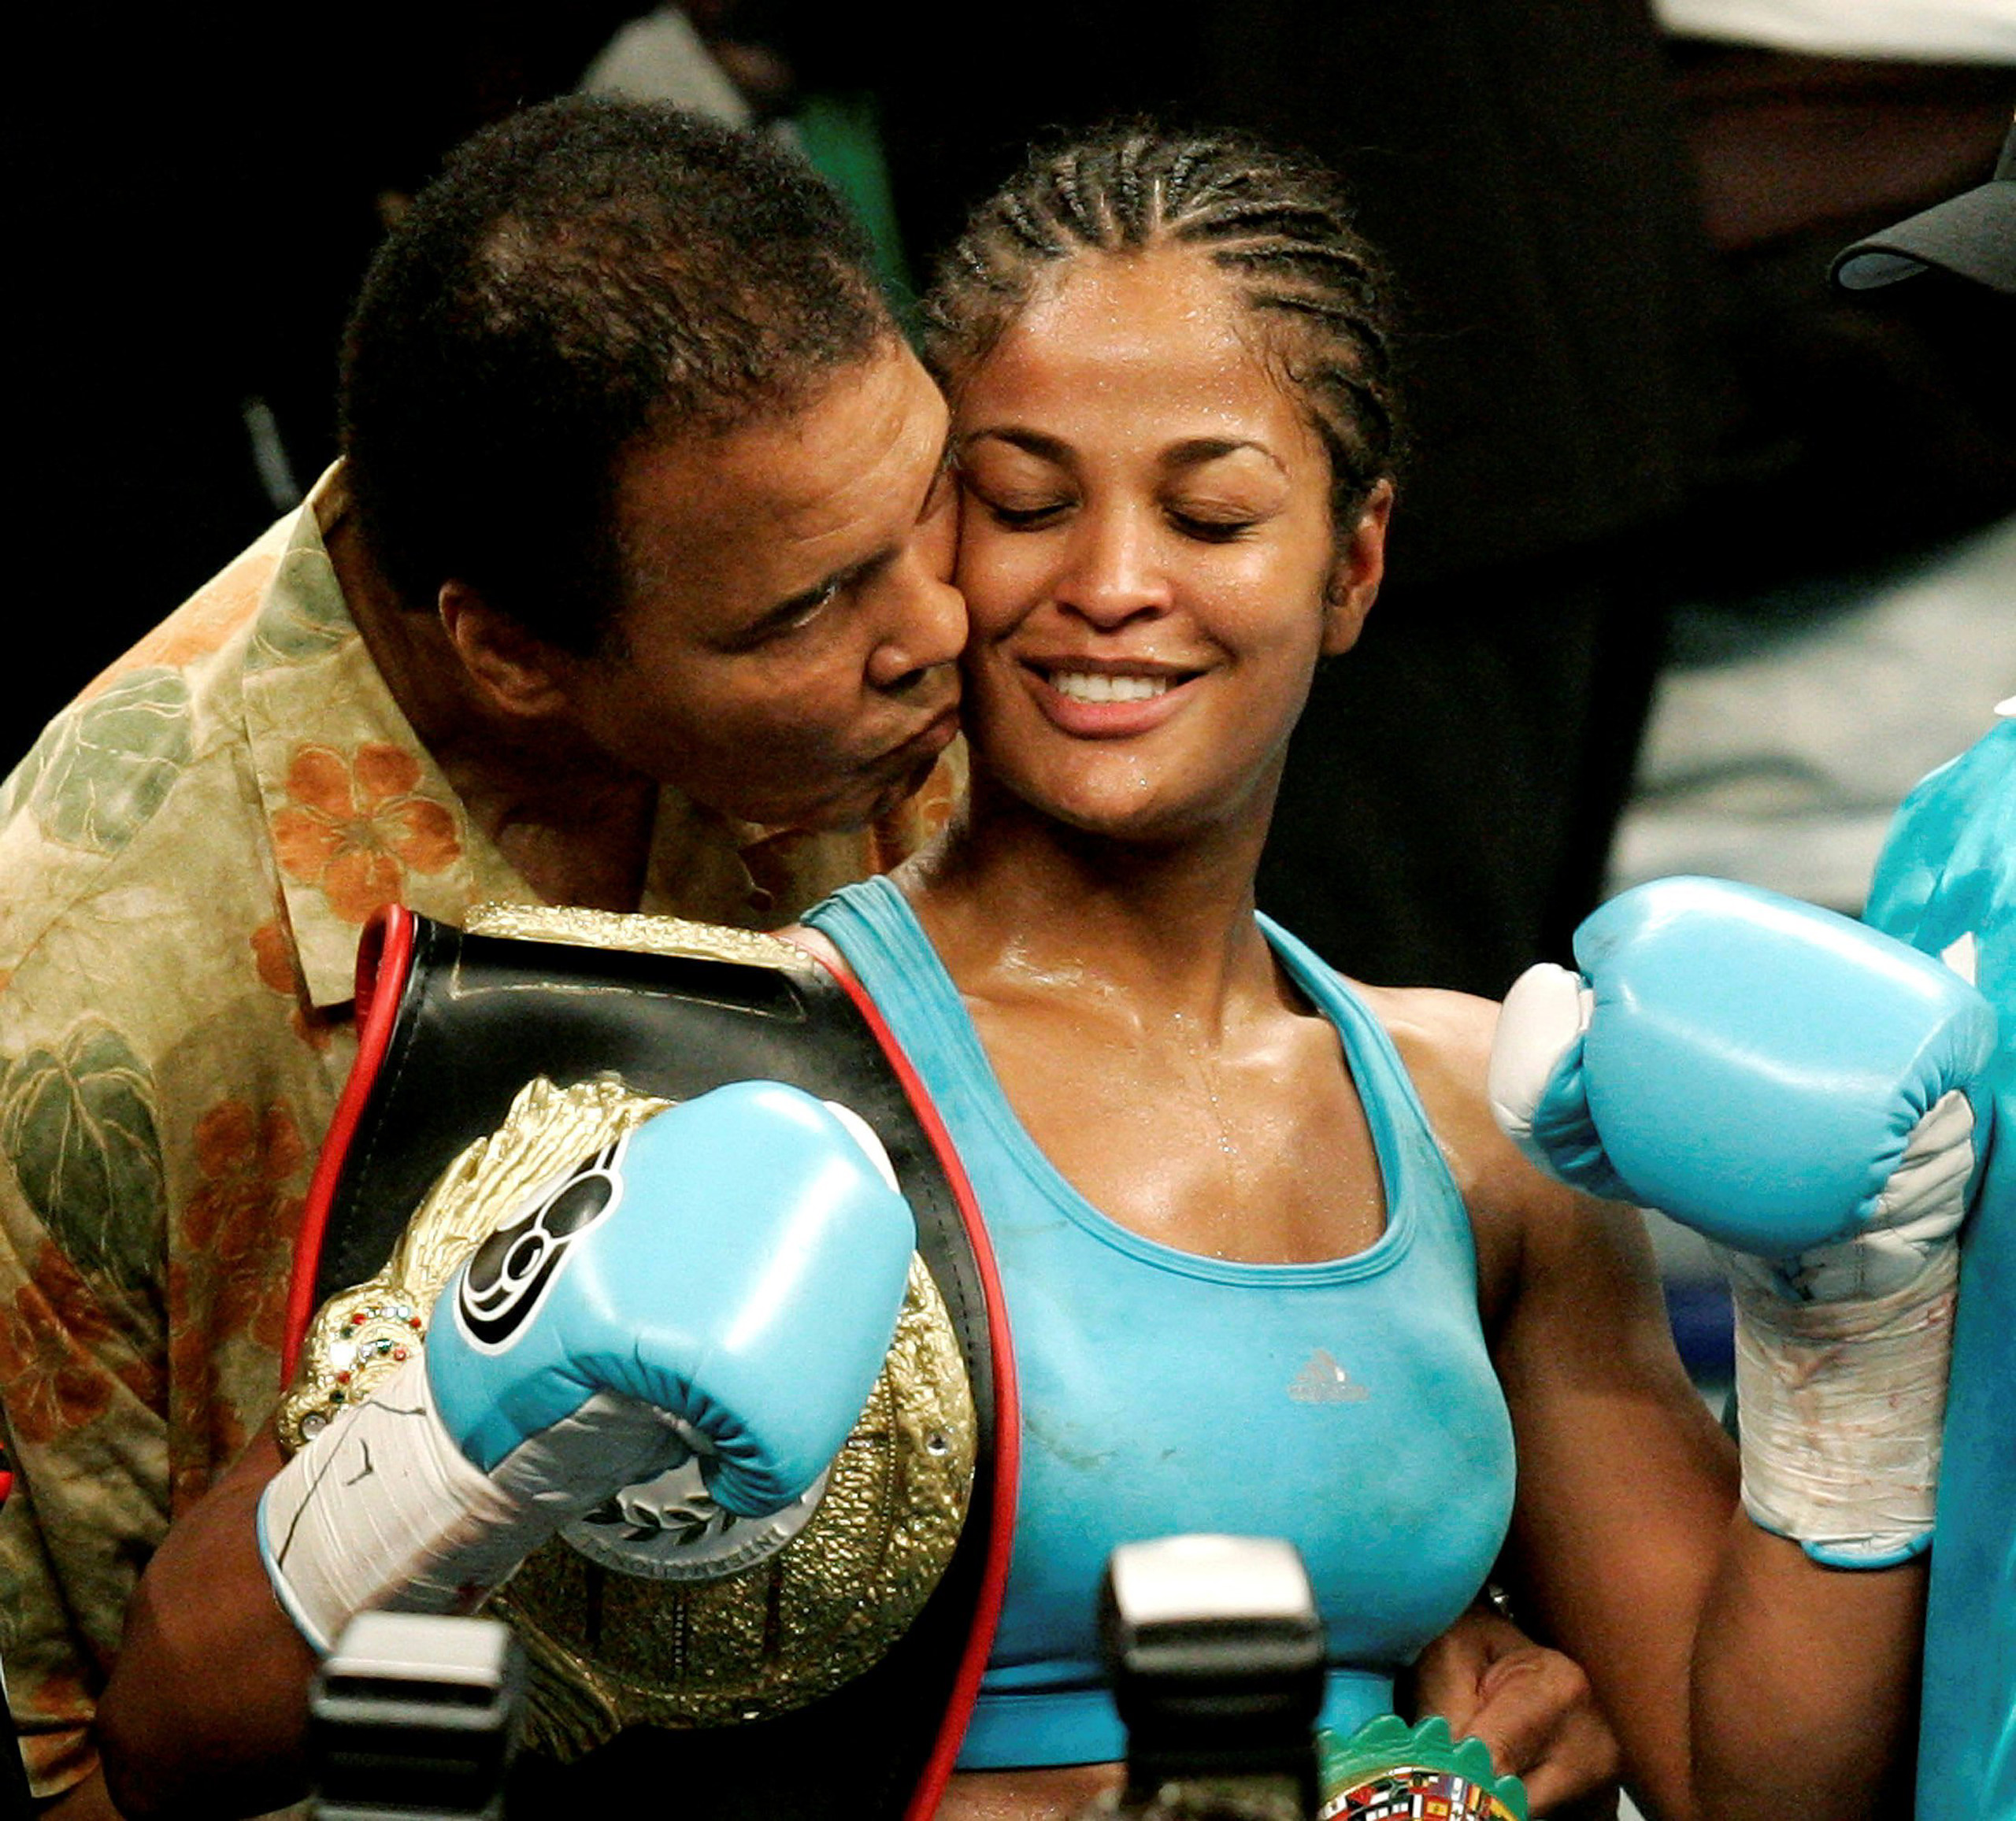 Laila Ali is kissed by her father, boxing great Muhammad Ali, at the MCI Center in Washington D.C., June 11, 2005. (Jason Reed—Reuters)